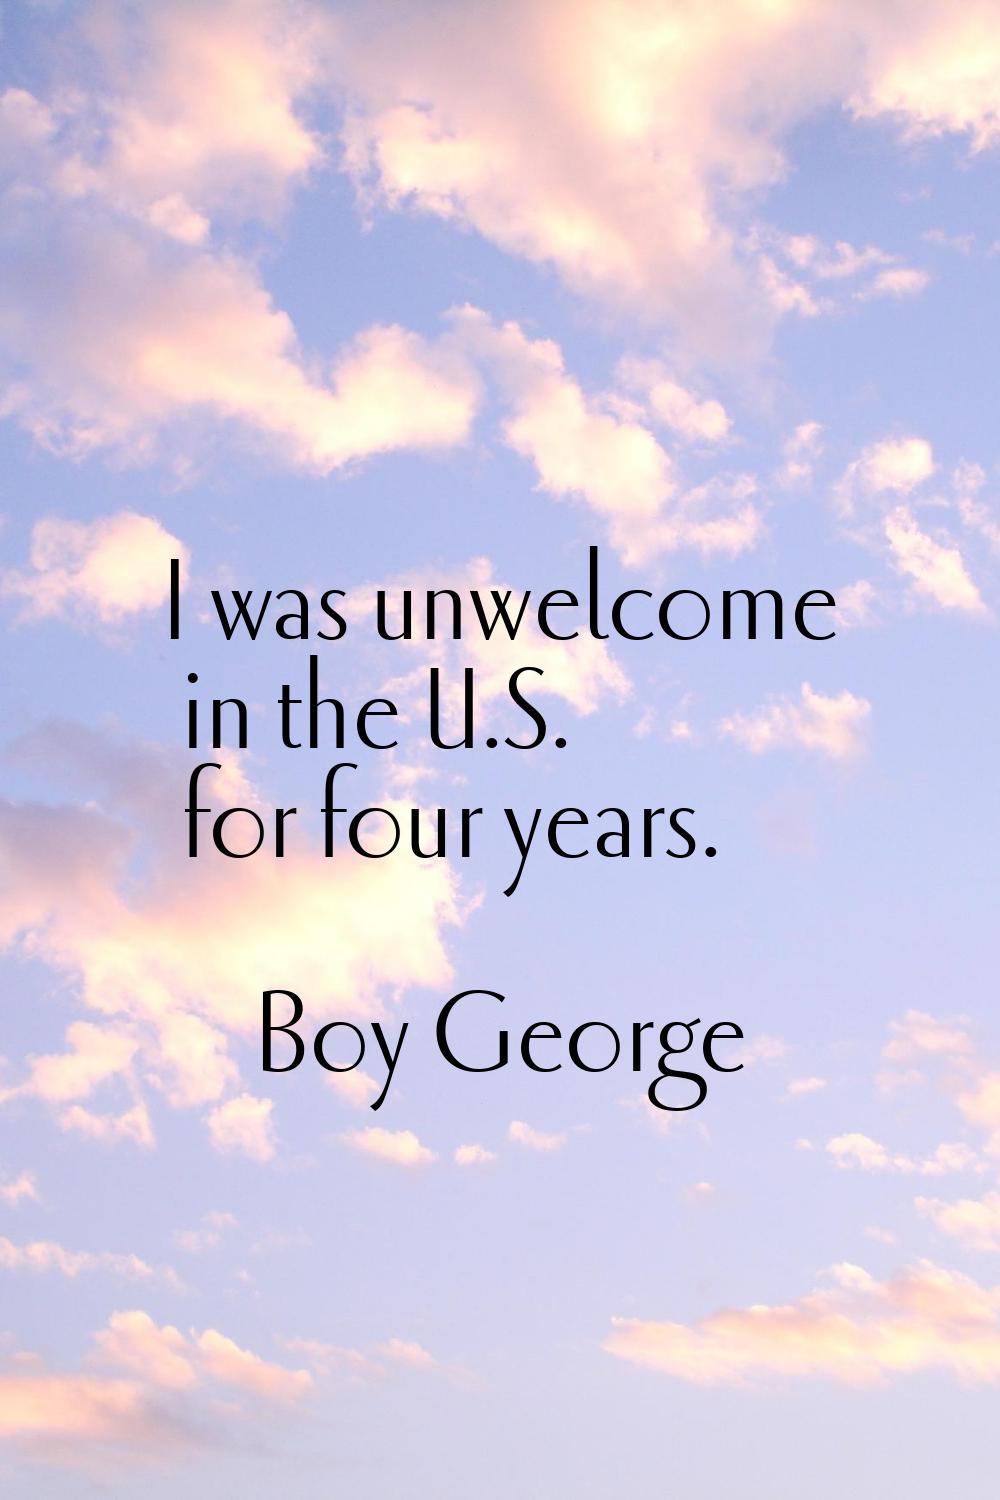 I was unwelcome in the U.S. for four years.